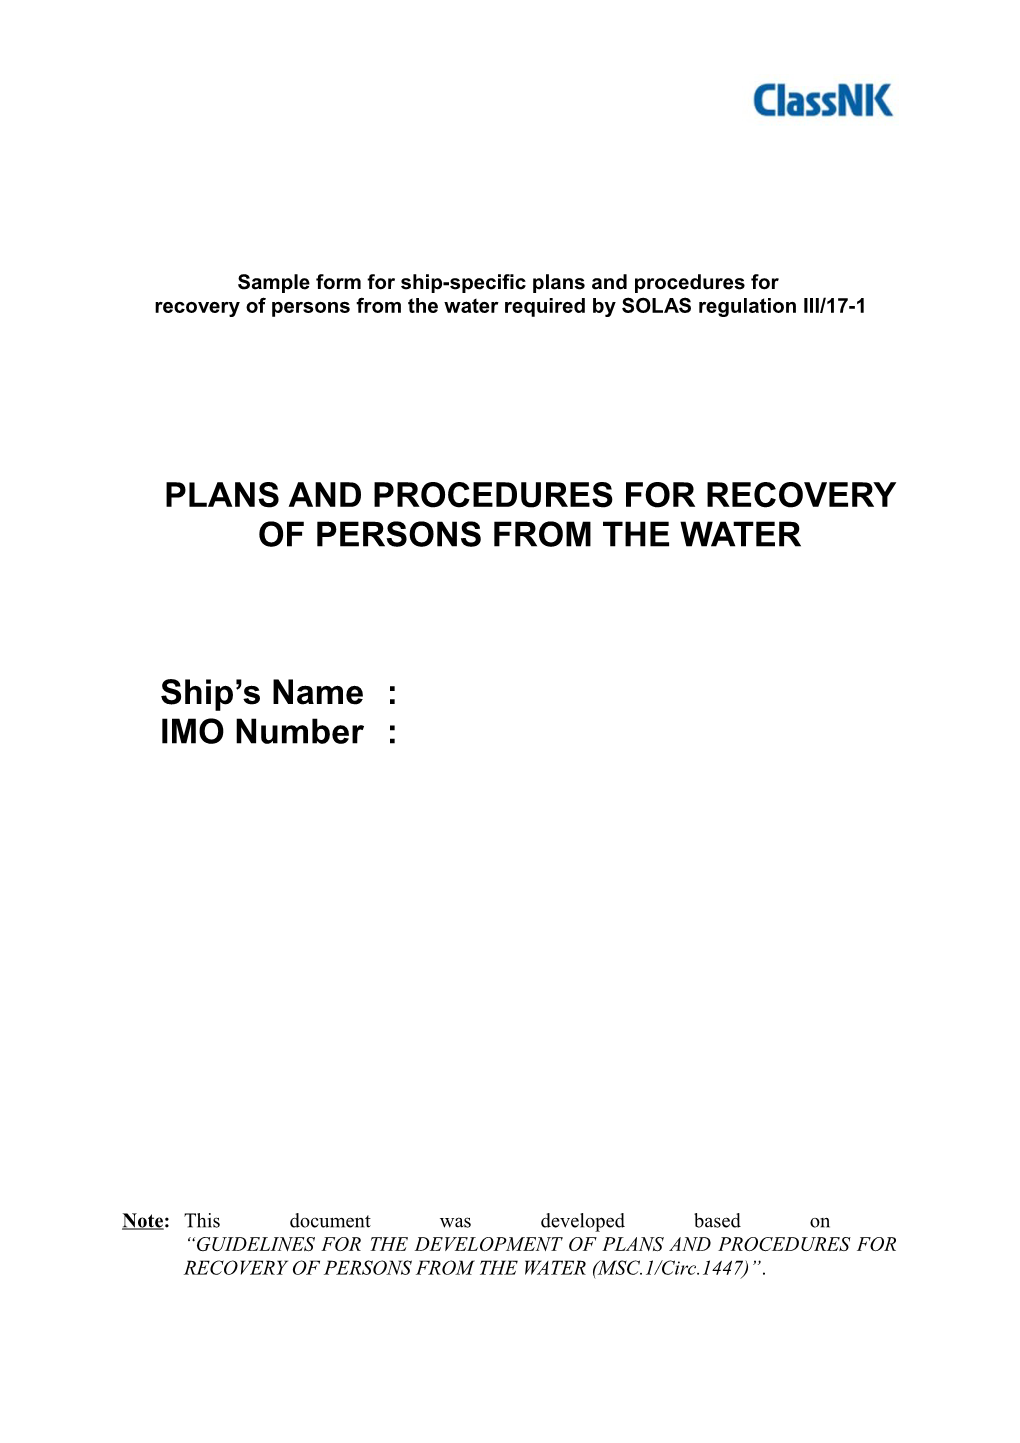 Plans and Procedures for Recovery of Persons from the Water